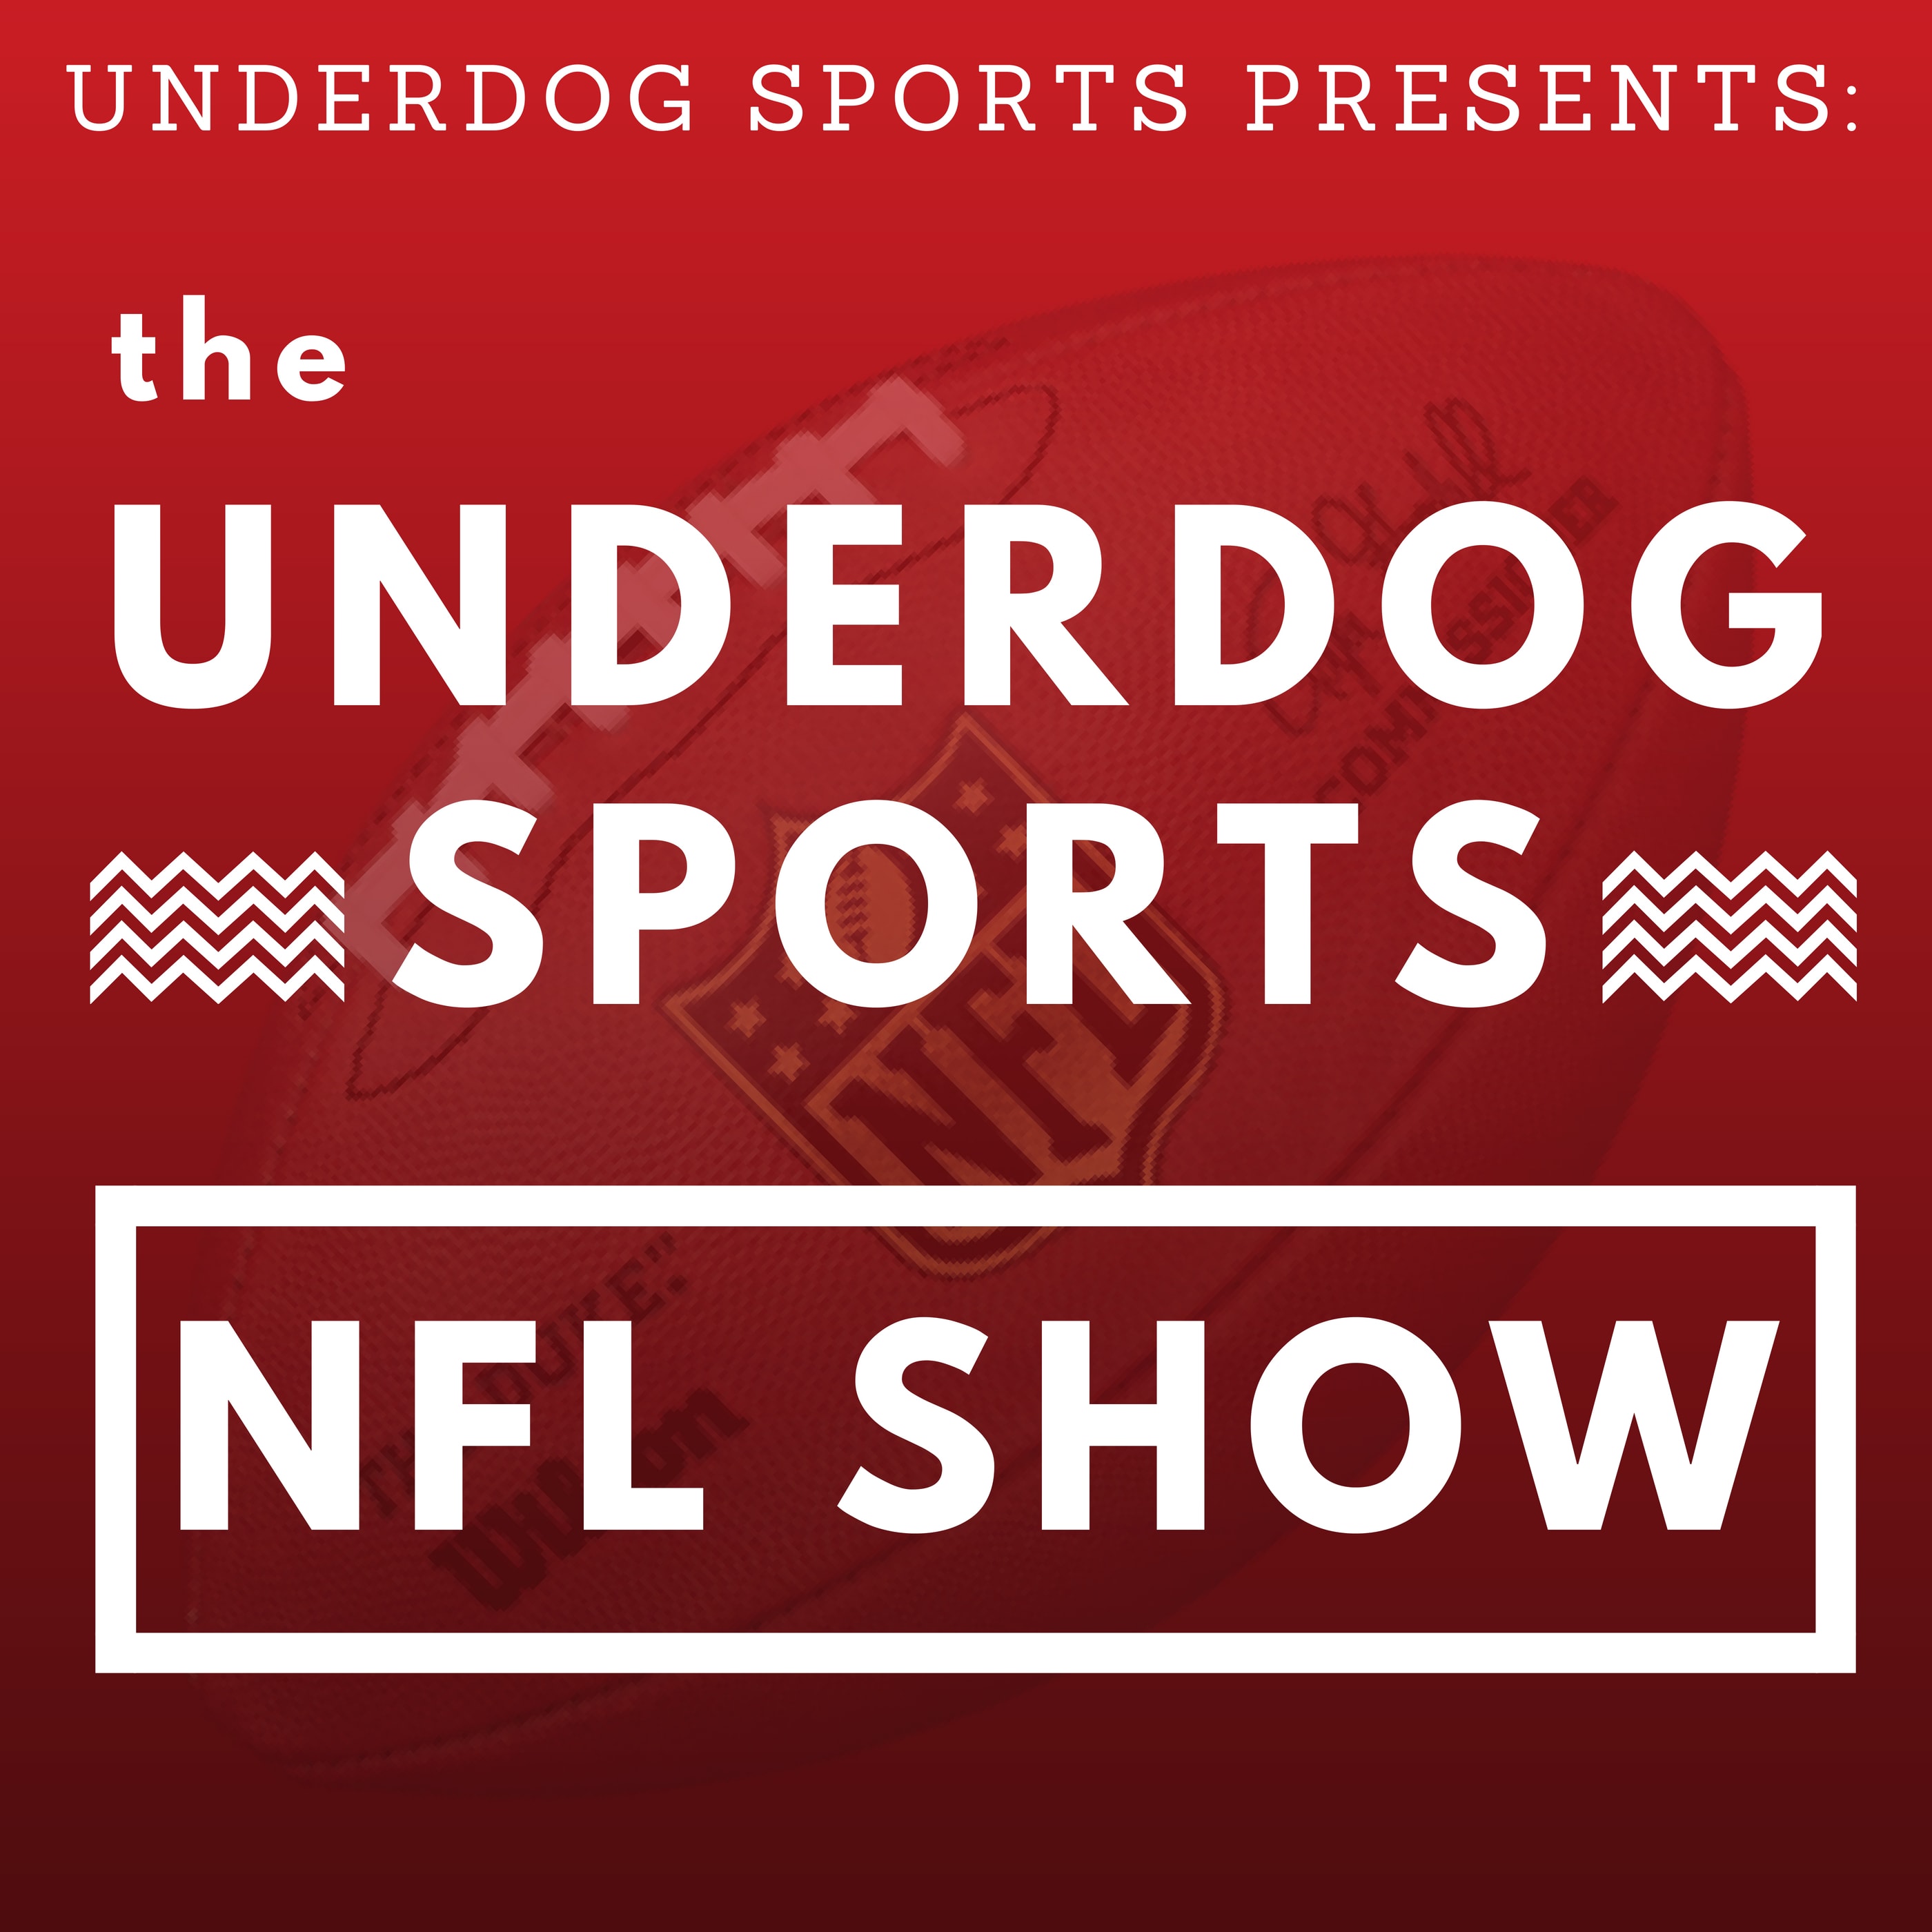 The Underdog Sports NFL Show (Old Feed) 